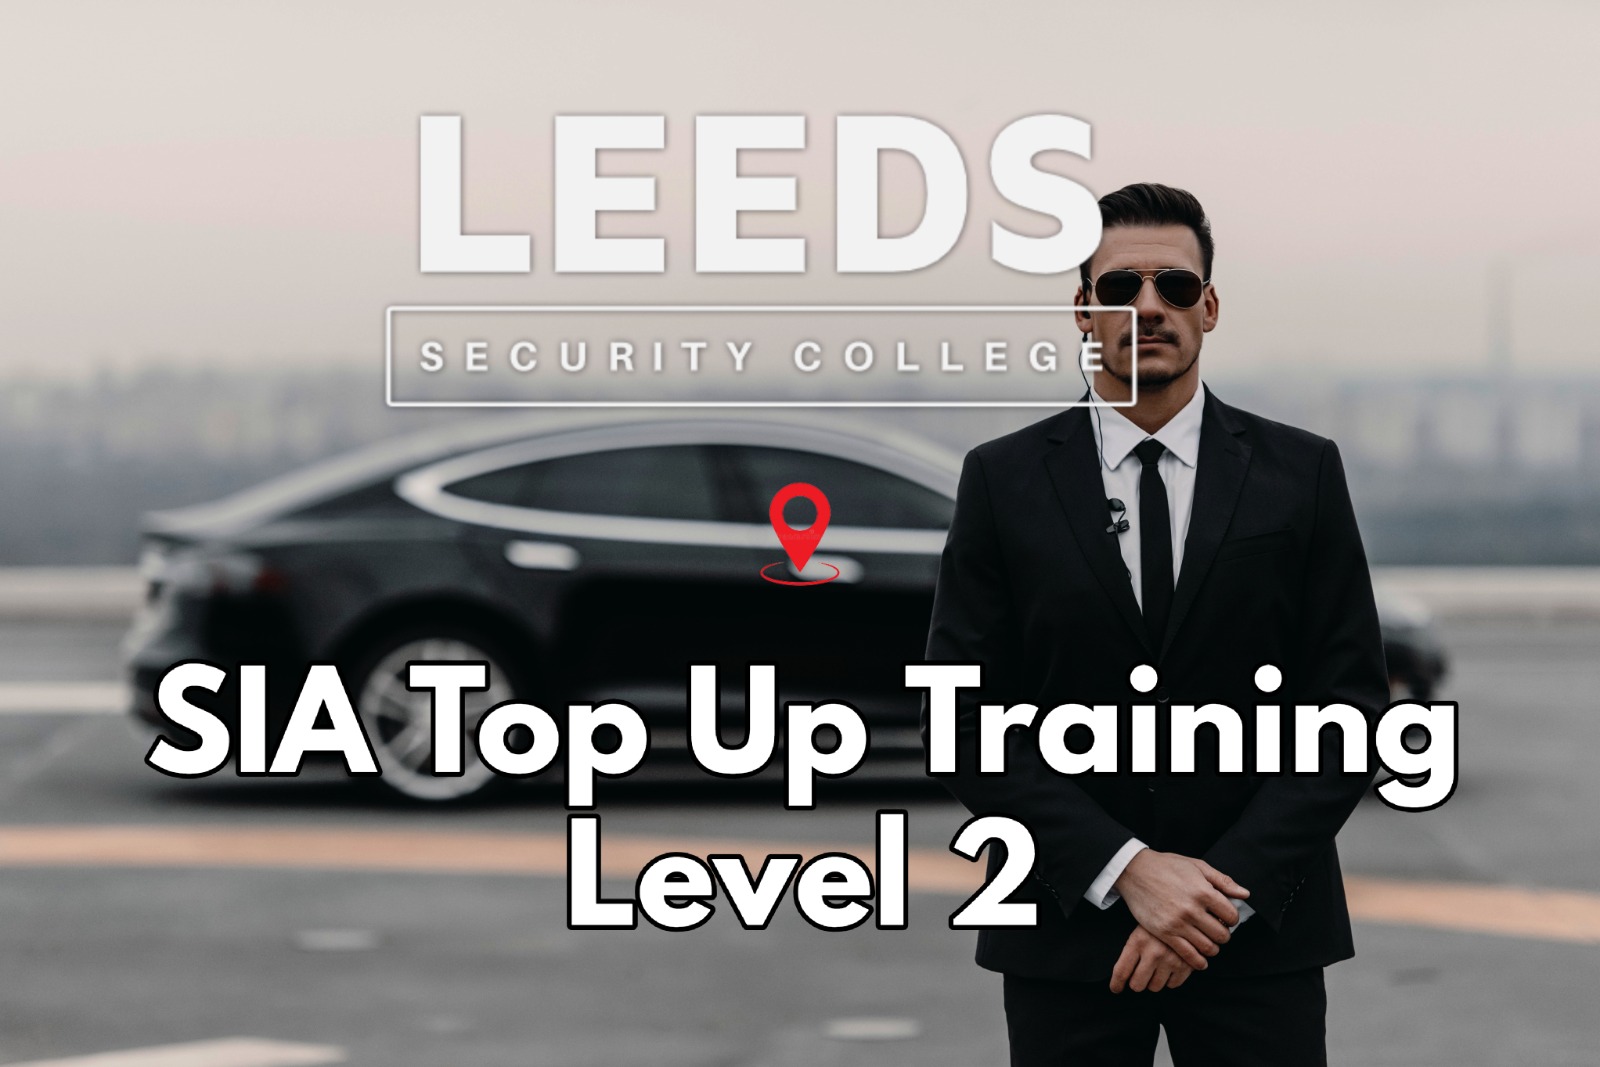 SIA Top Up Training Leeds Security College